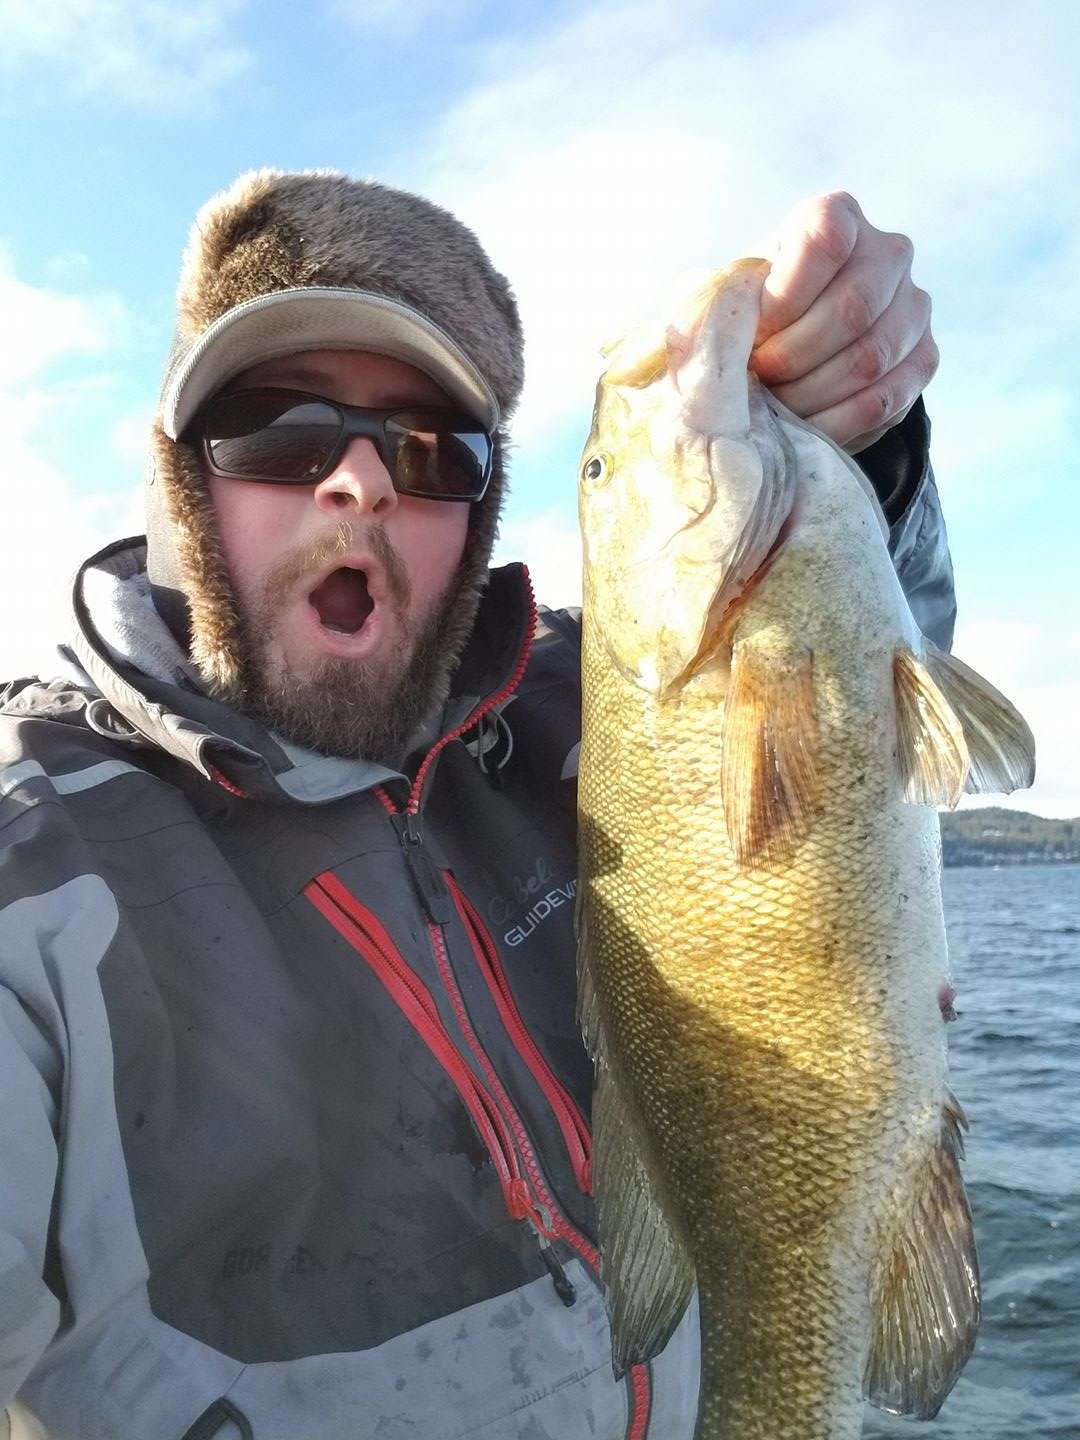 Donnie Golden was happy to catch this 4.12 pounder on Lake Coeur d Alene Idaho in 38 degree water! 